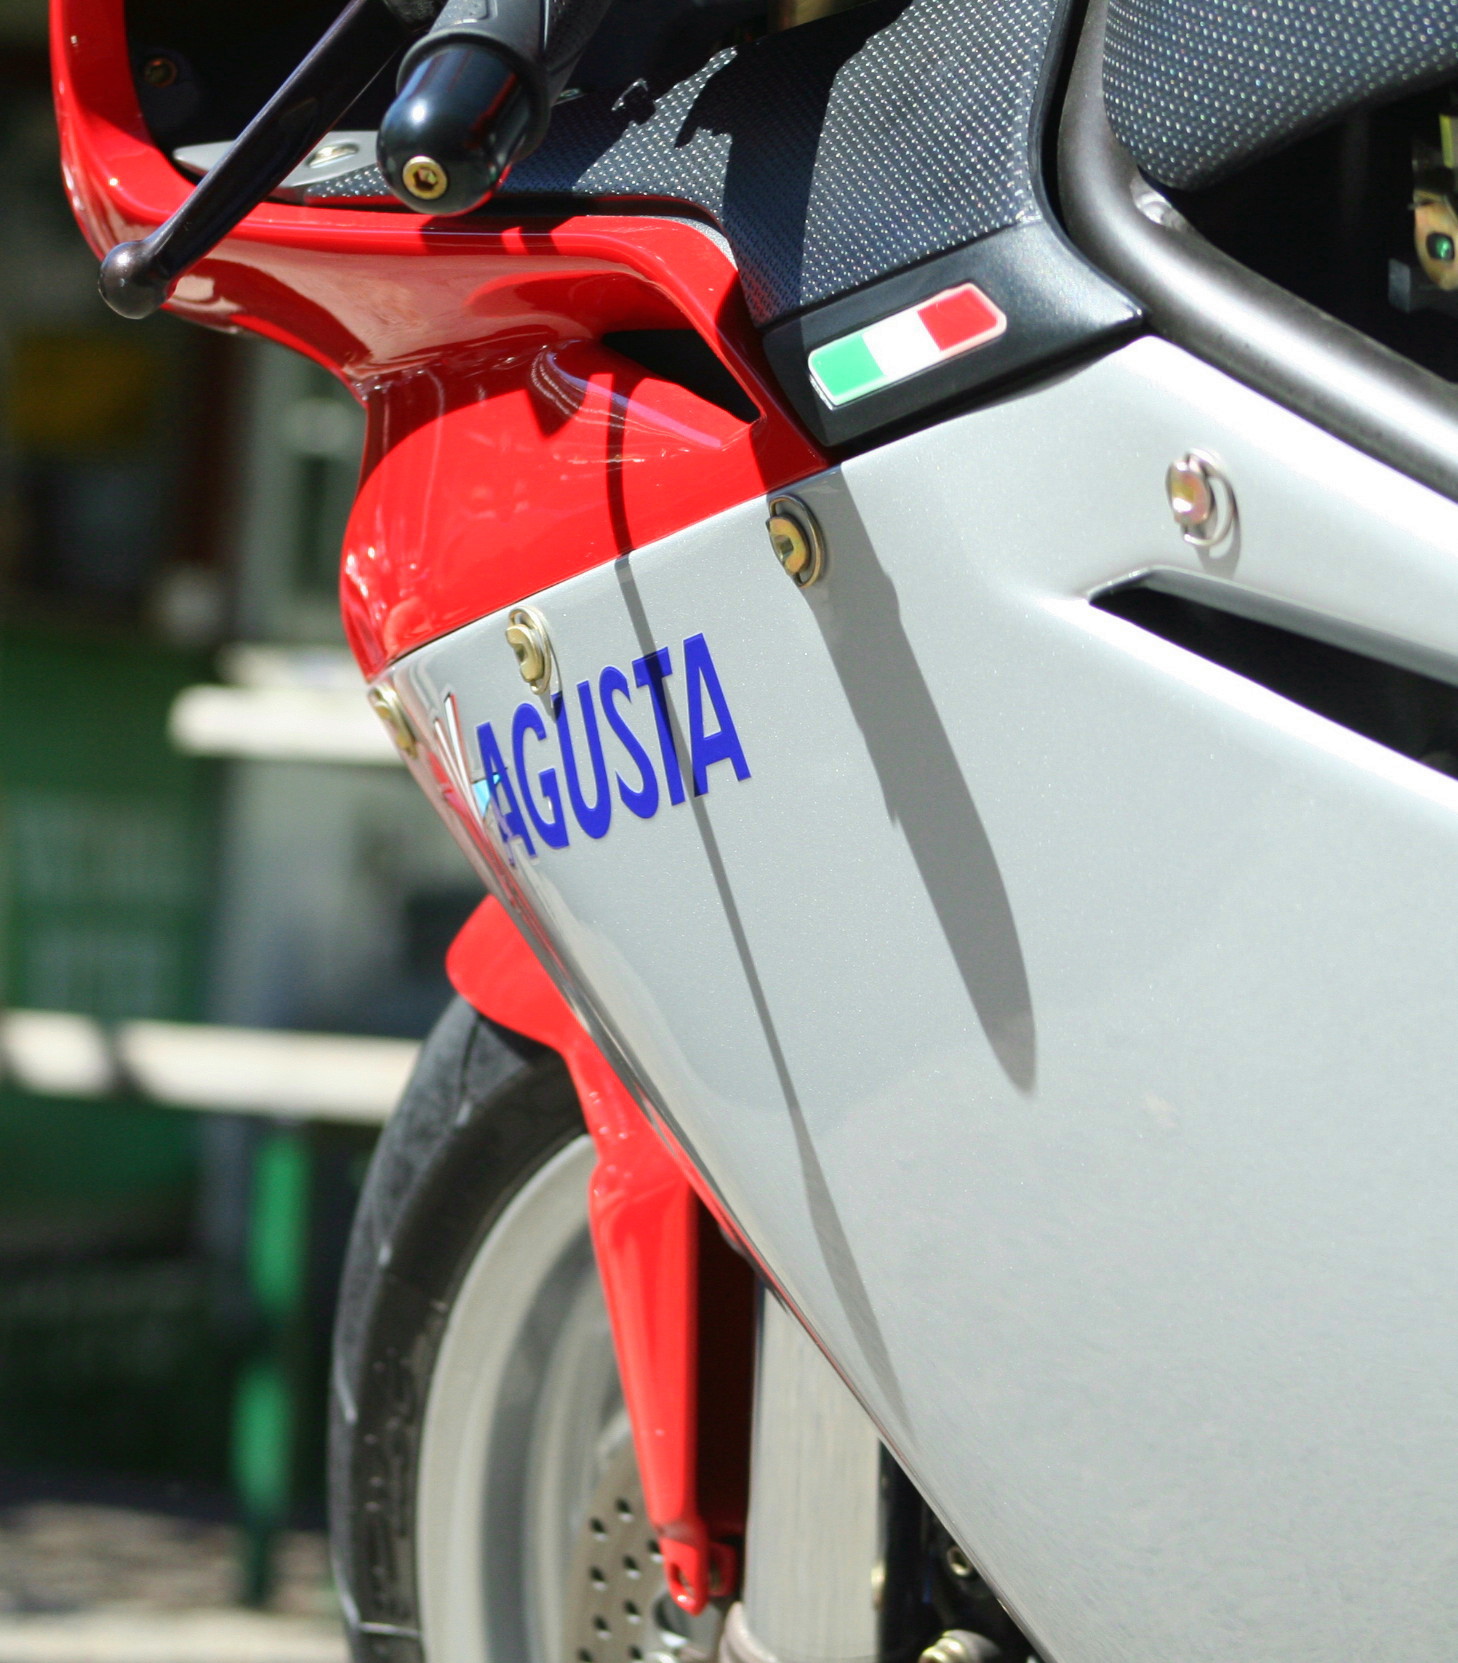 a close up view of the emblem on a red and silver motor bike